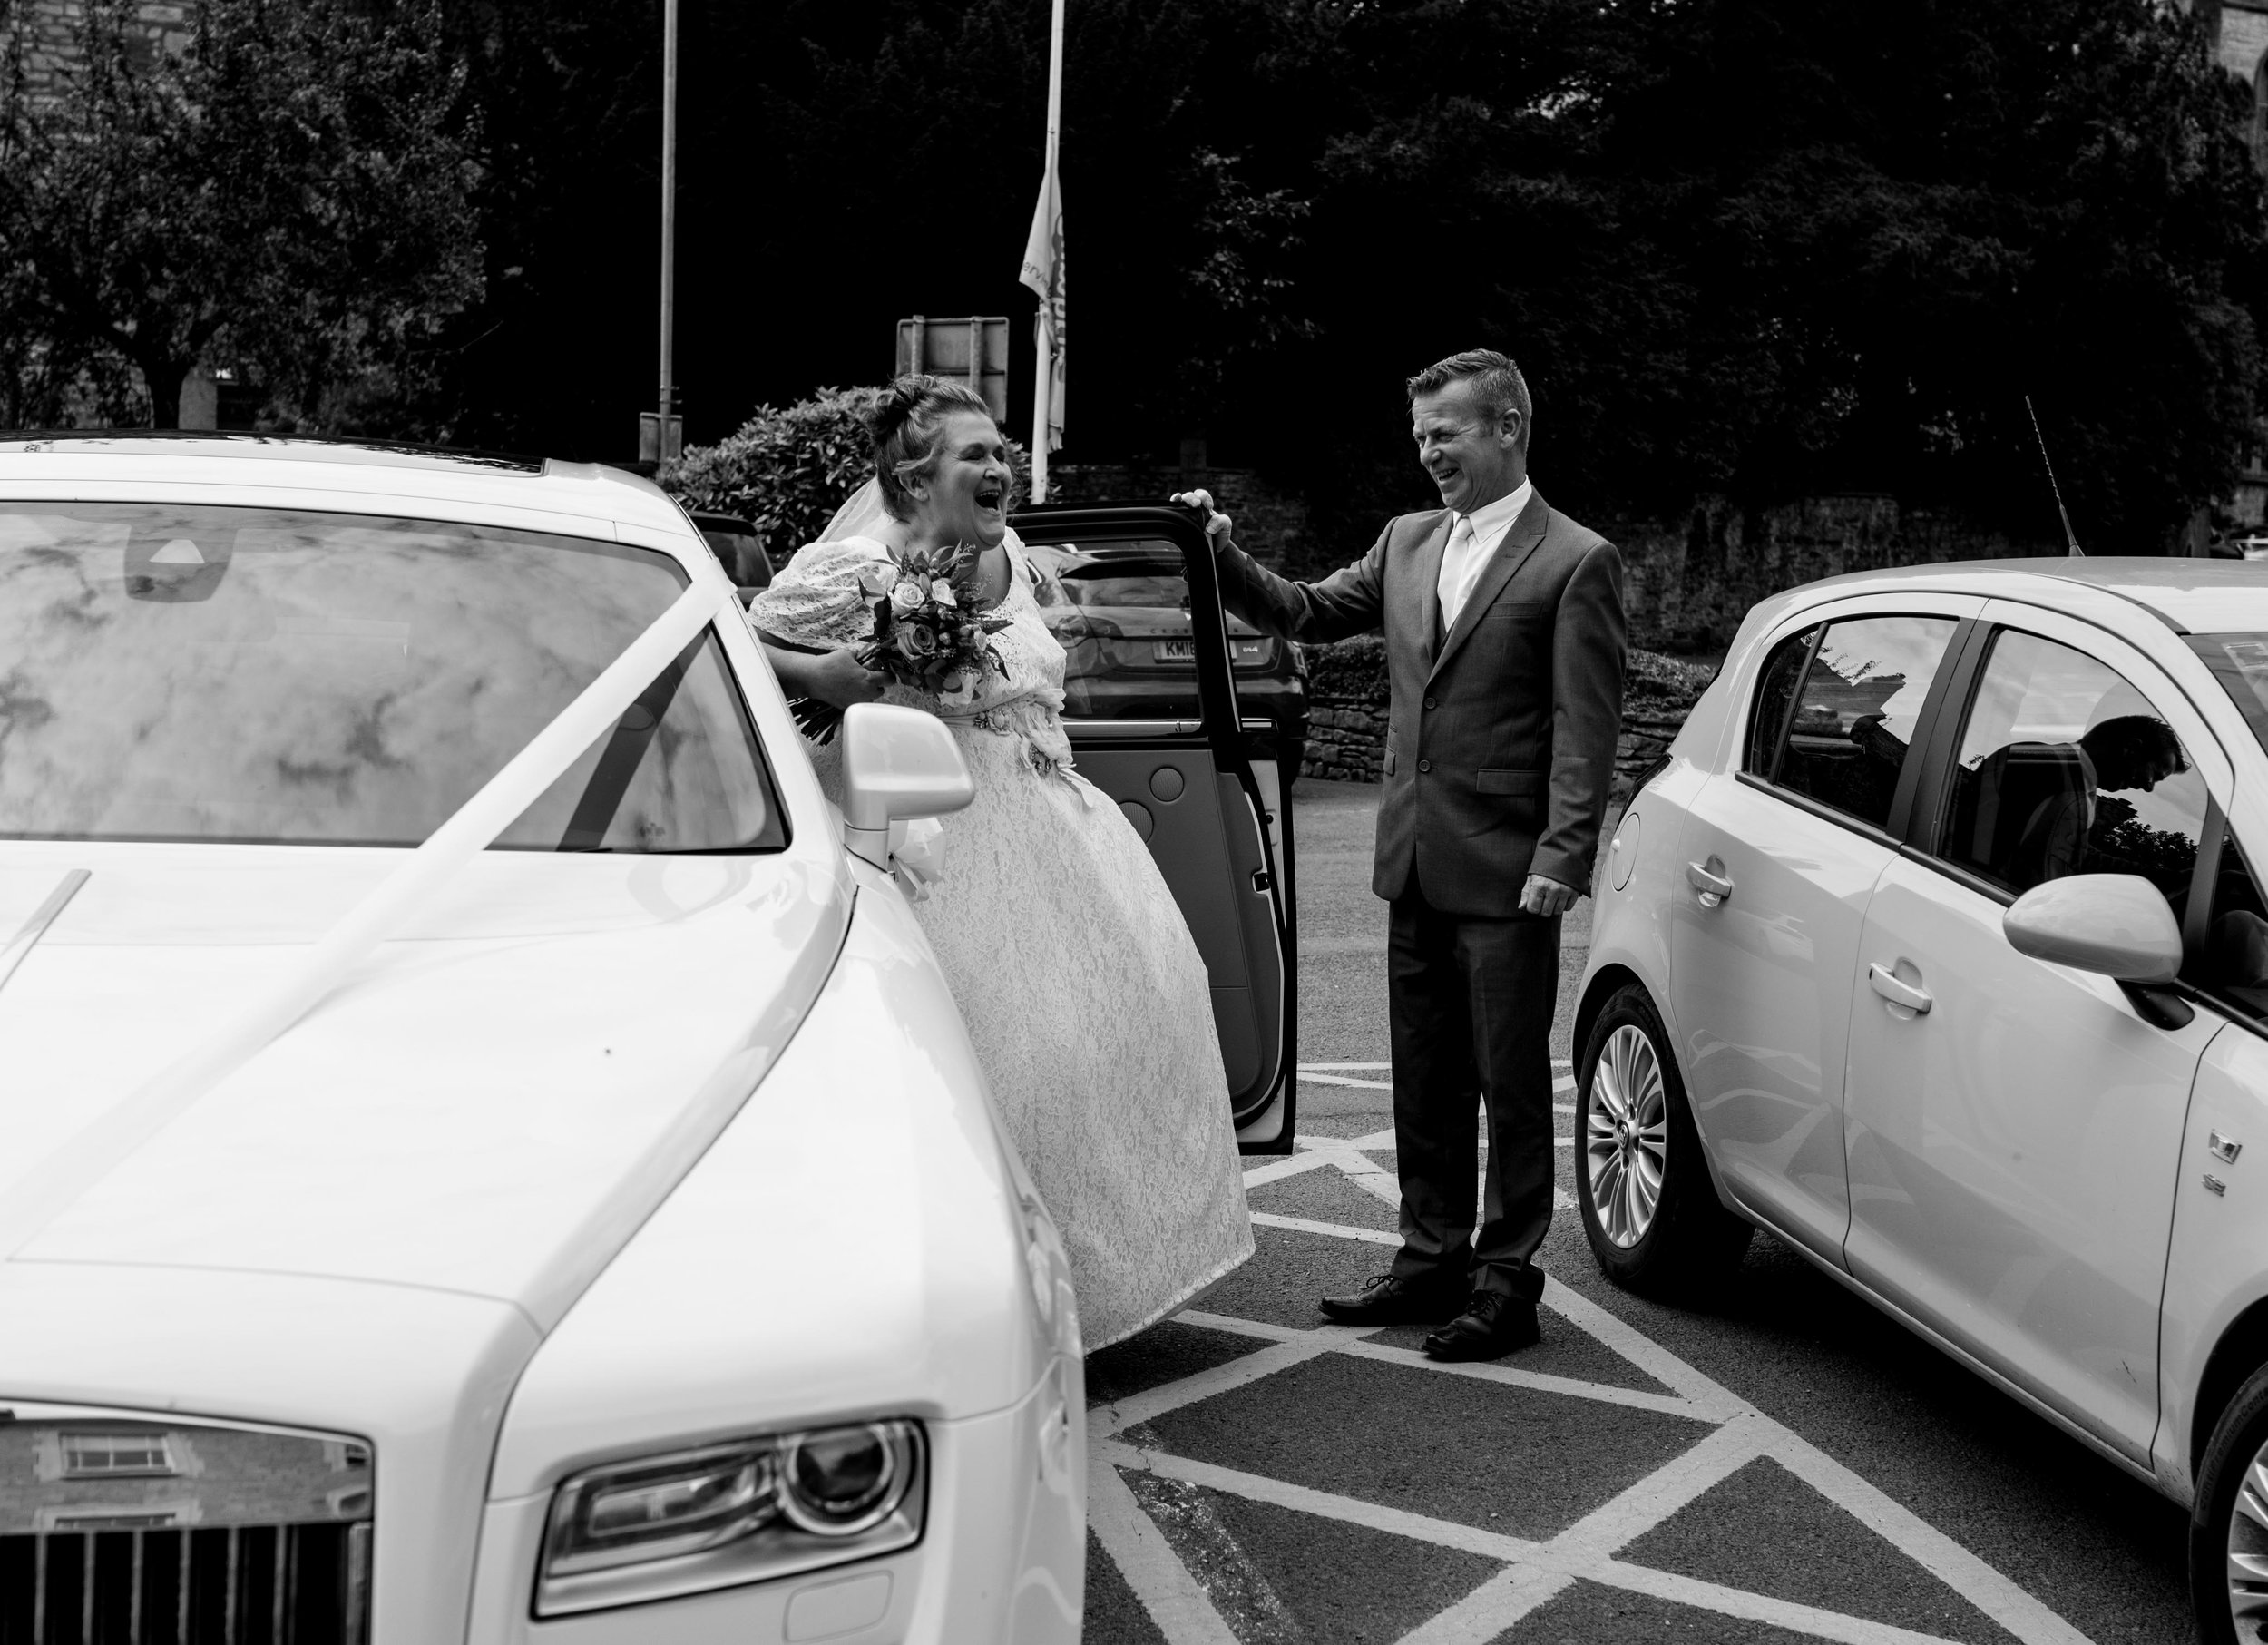 The bride arrives at kendal register office and laughs as she gets out of her white car